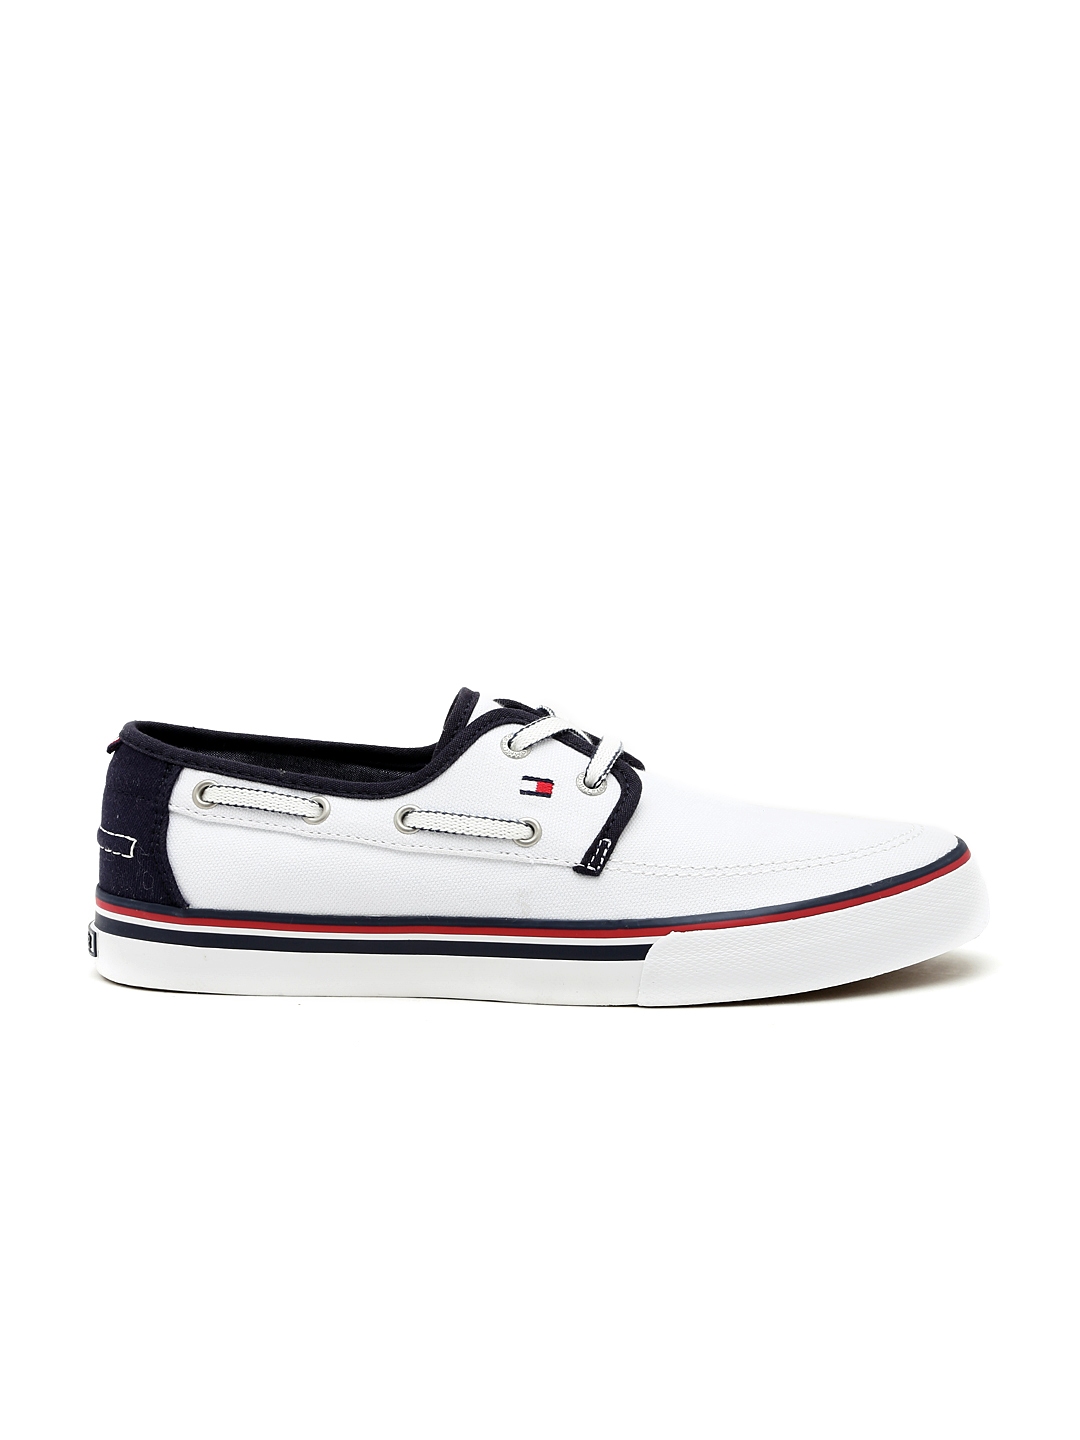 Buy Tommy Hilfiger Men White Boat Shoes - Casual Shoes for Men 1446176 ...